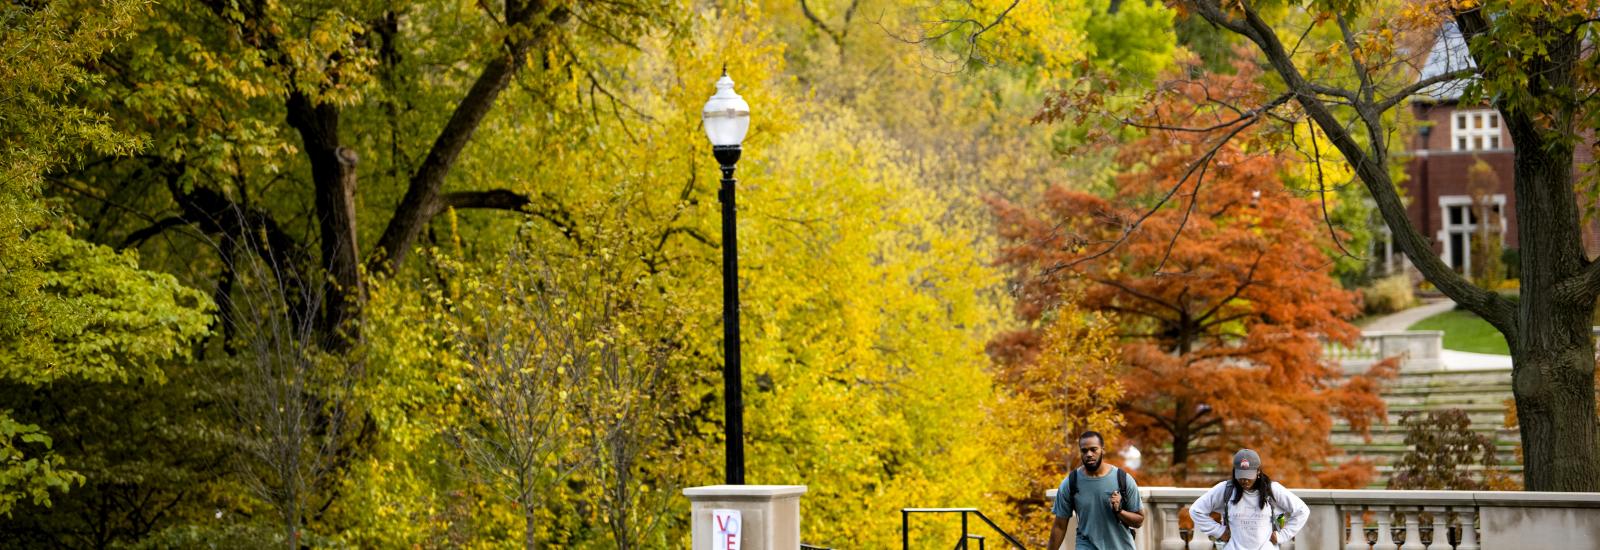 campus in the fall with two people walking